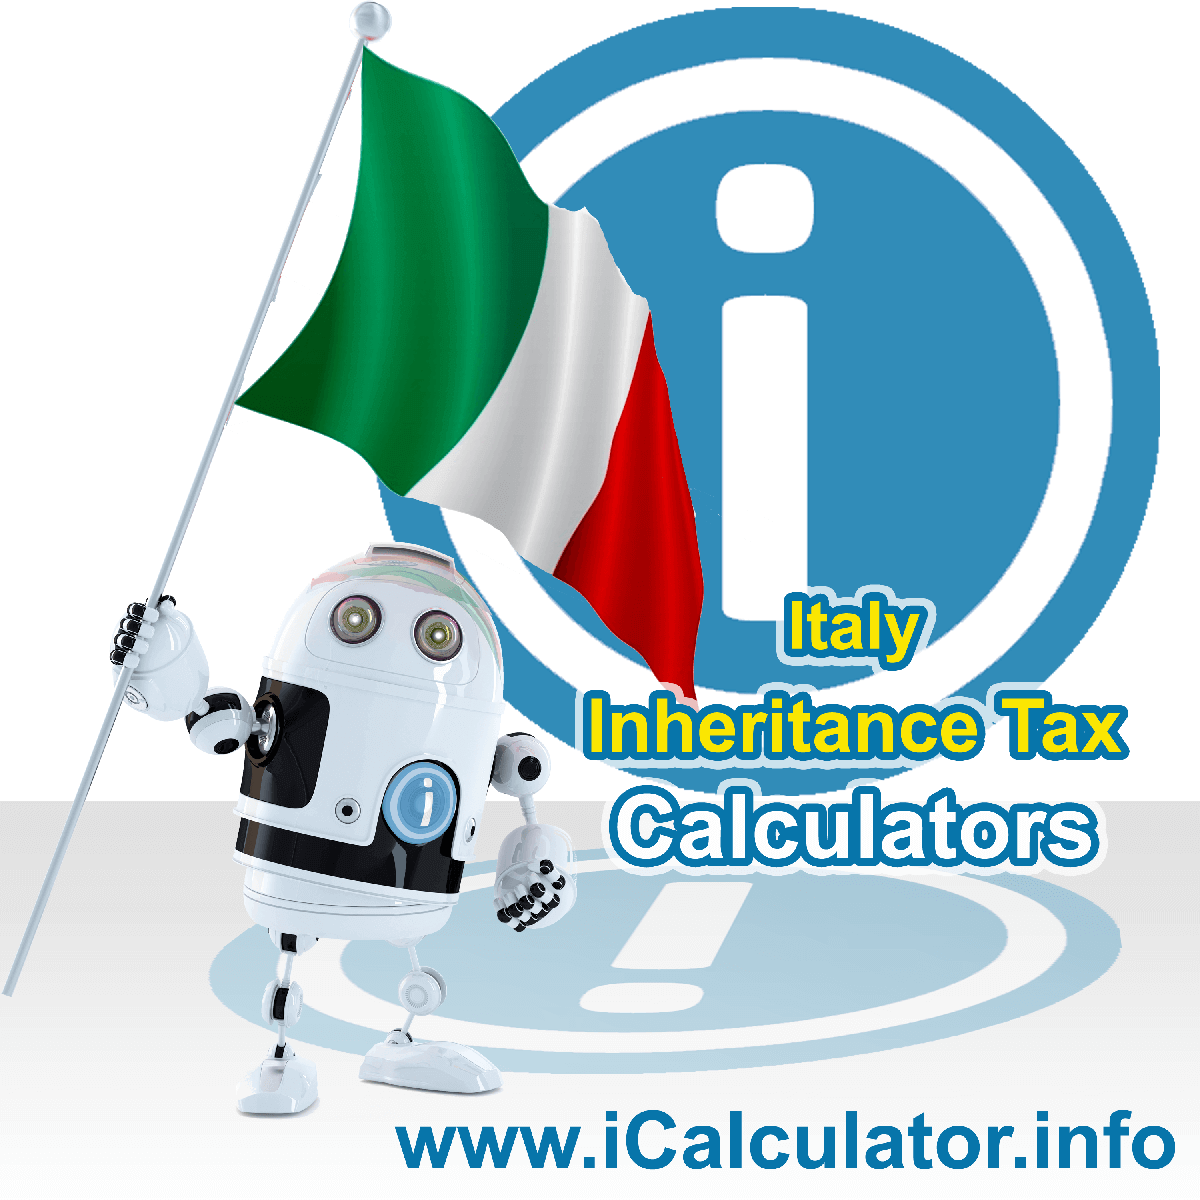 Italy Inheritance Tax Calculator. This image shows the Italy flag and information relating to the inheritance tax rate formula used for calculating Inheritance Tax in Italy using the Italy Inheritance Tax Calculator in 2023